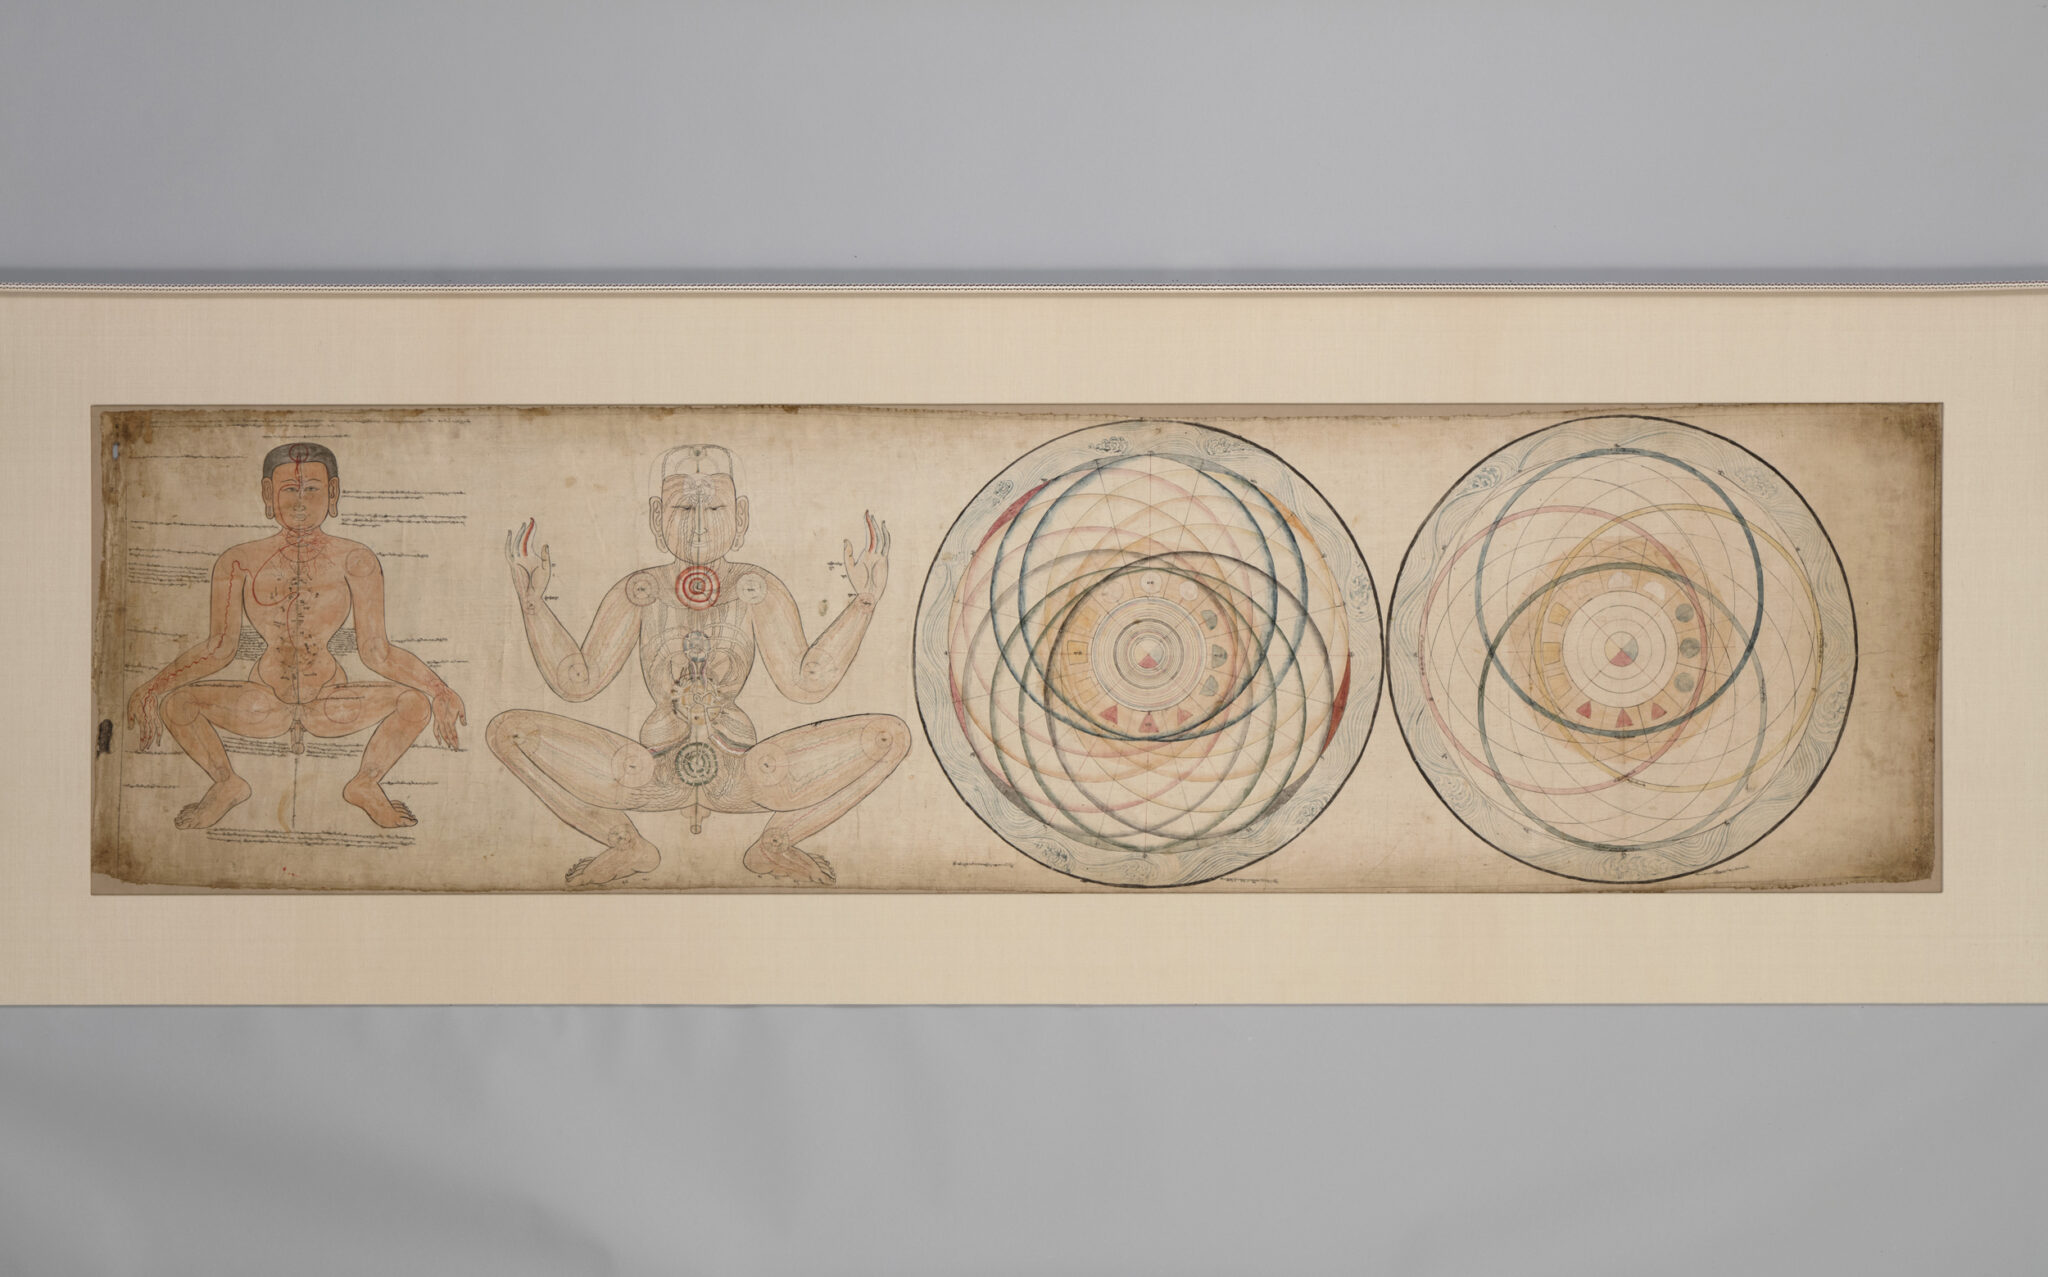 Four illustrations on rectangular beige folio: two human anatomical studies, two circles with inset geometrical compositions